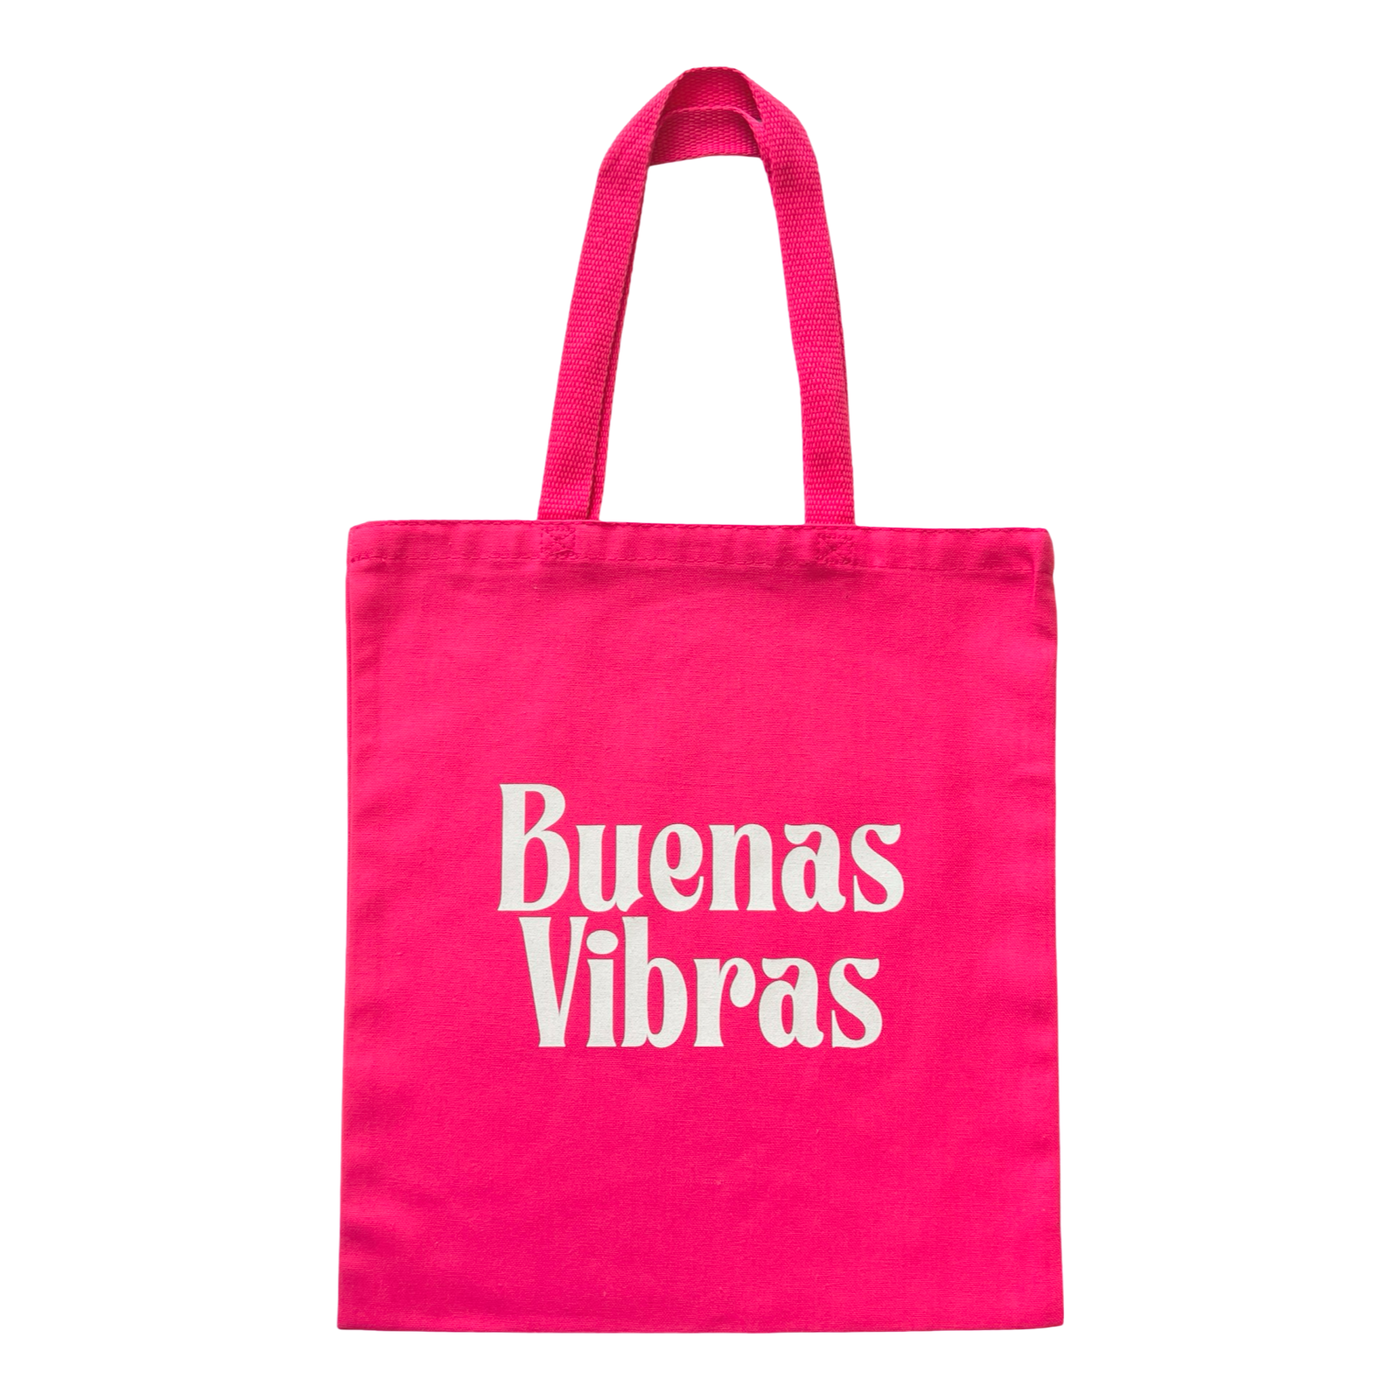 pink canvas tote bag with the phrase Buenas Vibras in white lettering